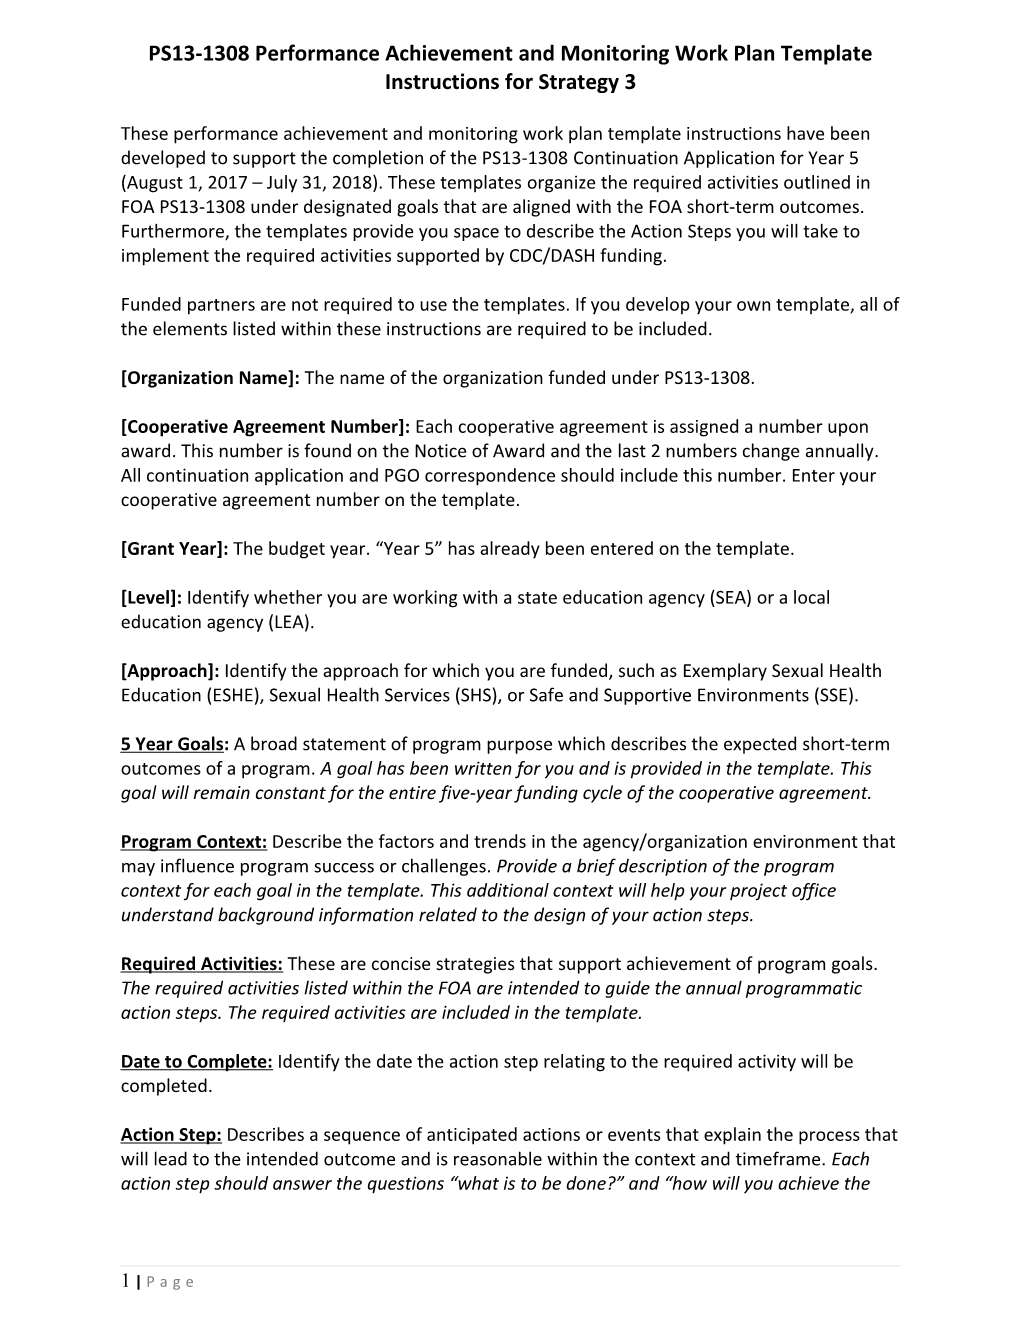 PS13-1308 Performance Achievement and Monitoring Work Plan Template Instructions for Strategy